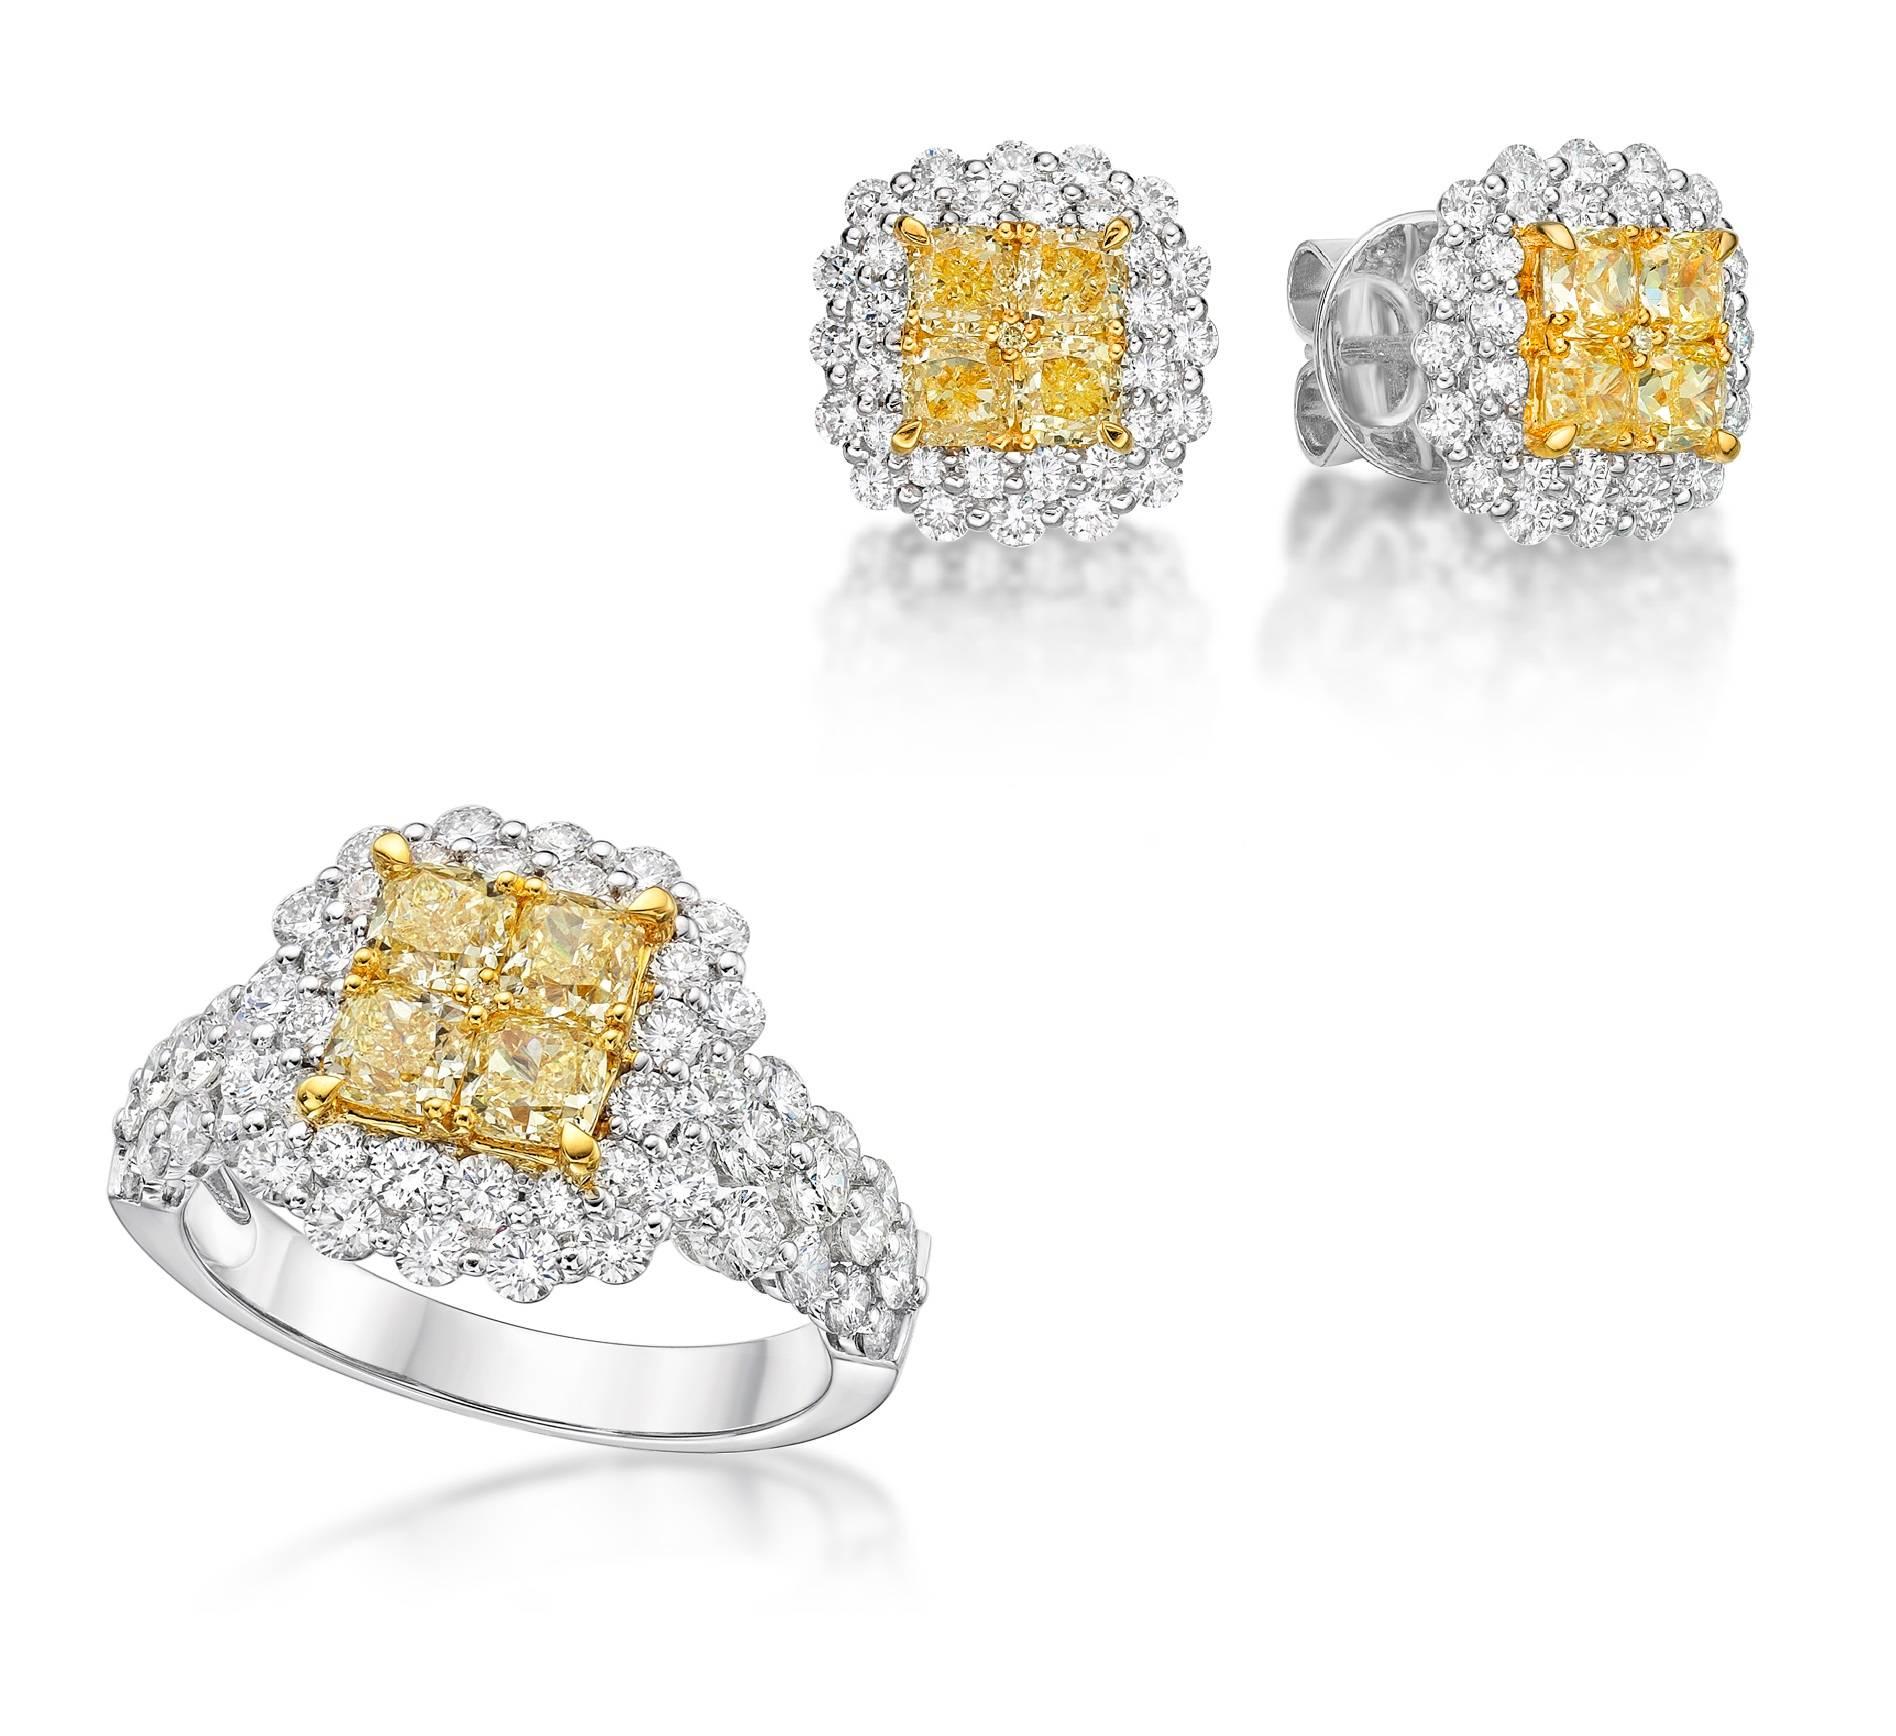 Gilin's classic, yet elegant collection. Perfect for your everyday wear. 

The yellow diamond illusion has a measurement of approximately a size of a 2.00 carat Princess Cut Diamond. This design has a pair of matching earrings, making it an ideal